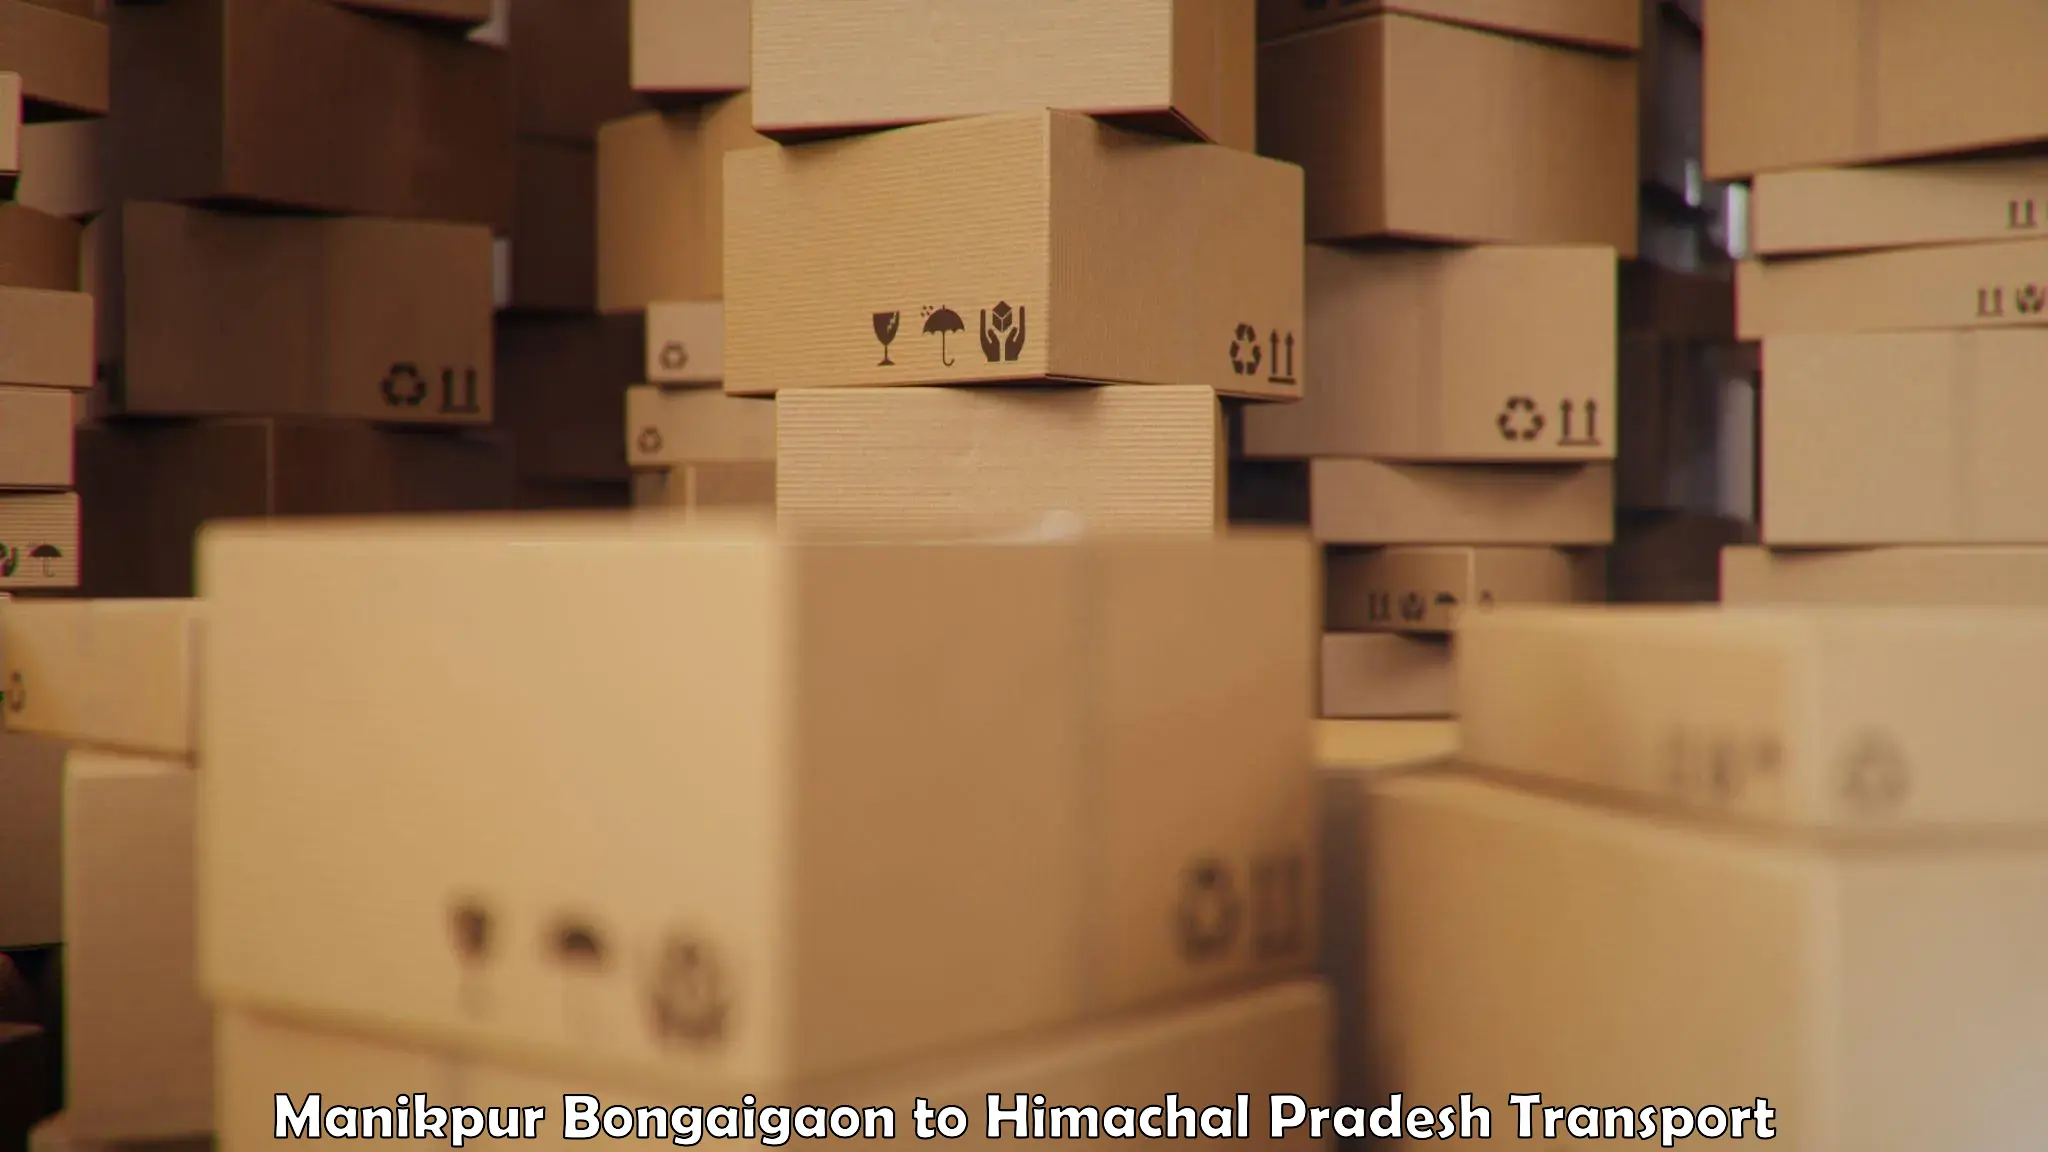 Truck transport companies in India Manikpur Bongaigaon to Sujanpur